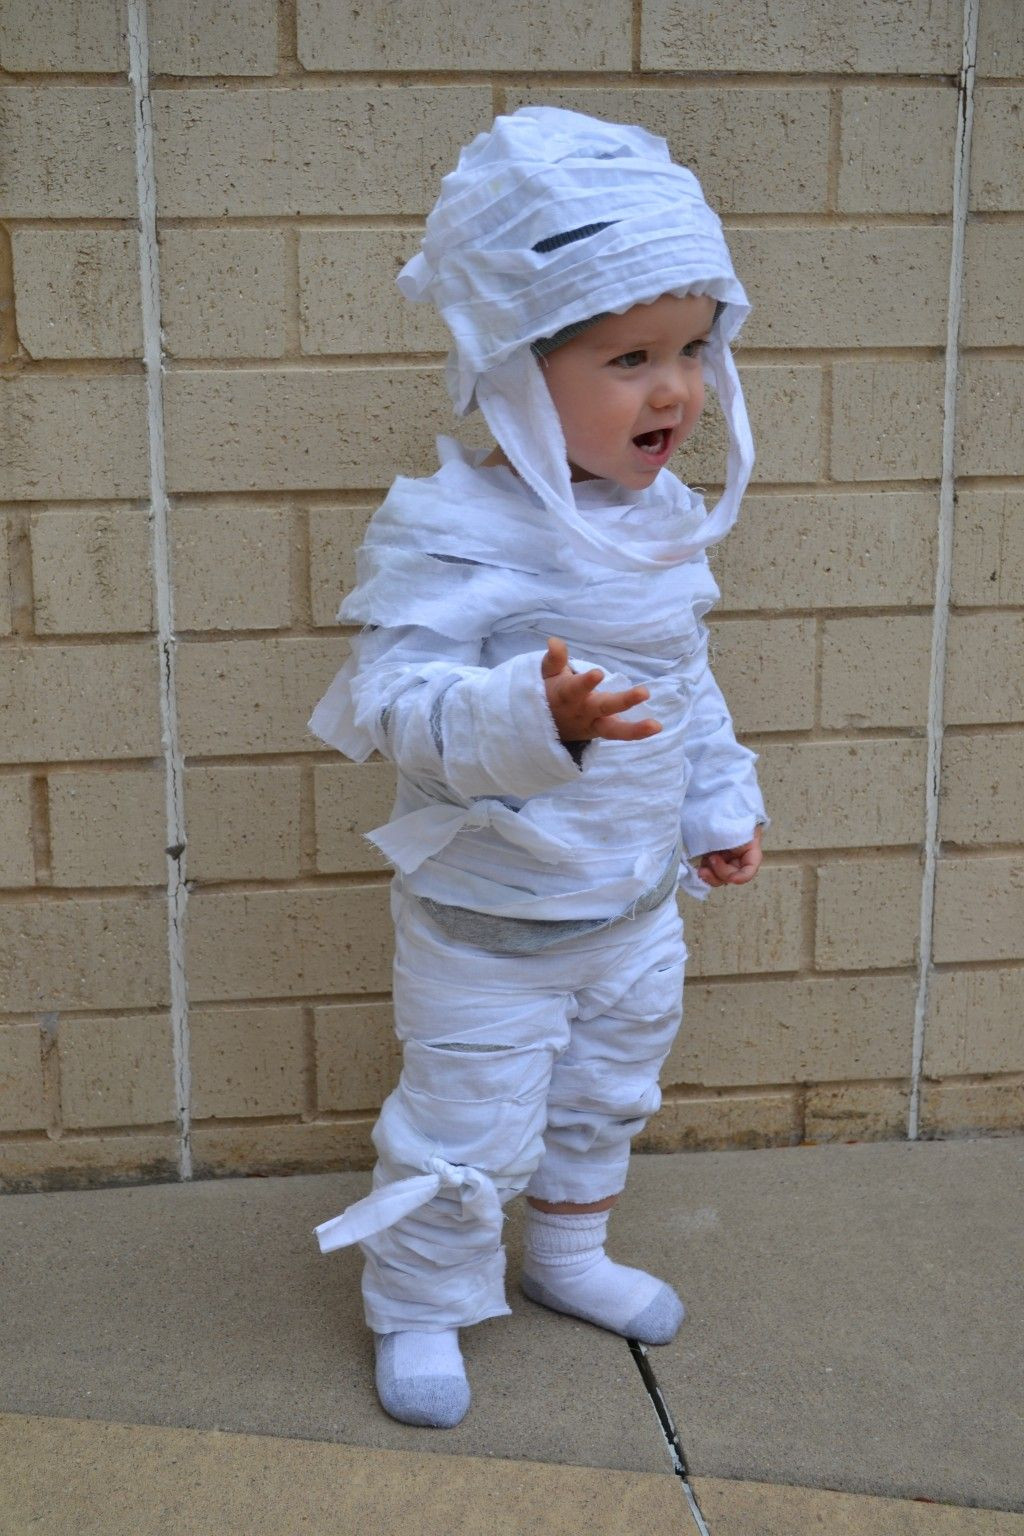 Toddler Costume DIY
 How To Make An Easy No Sew Child s Mummy Costume